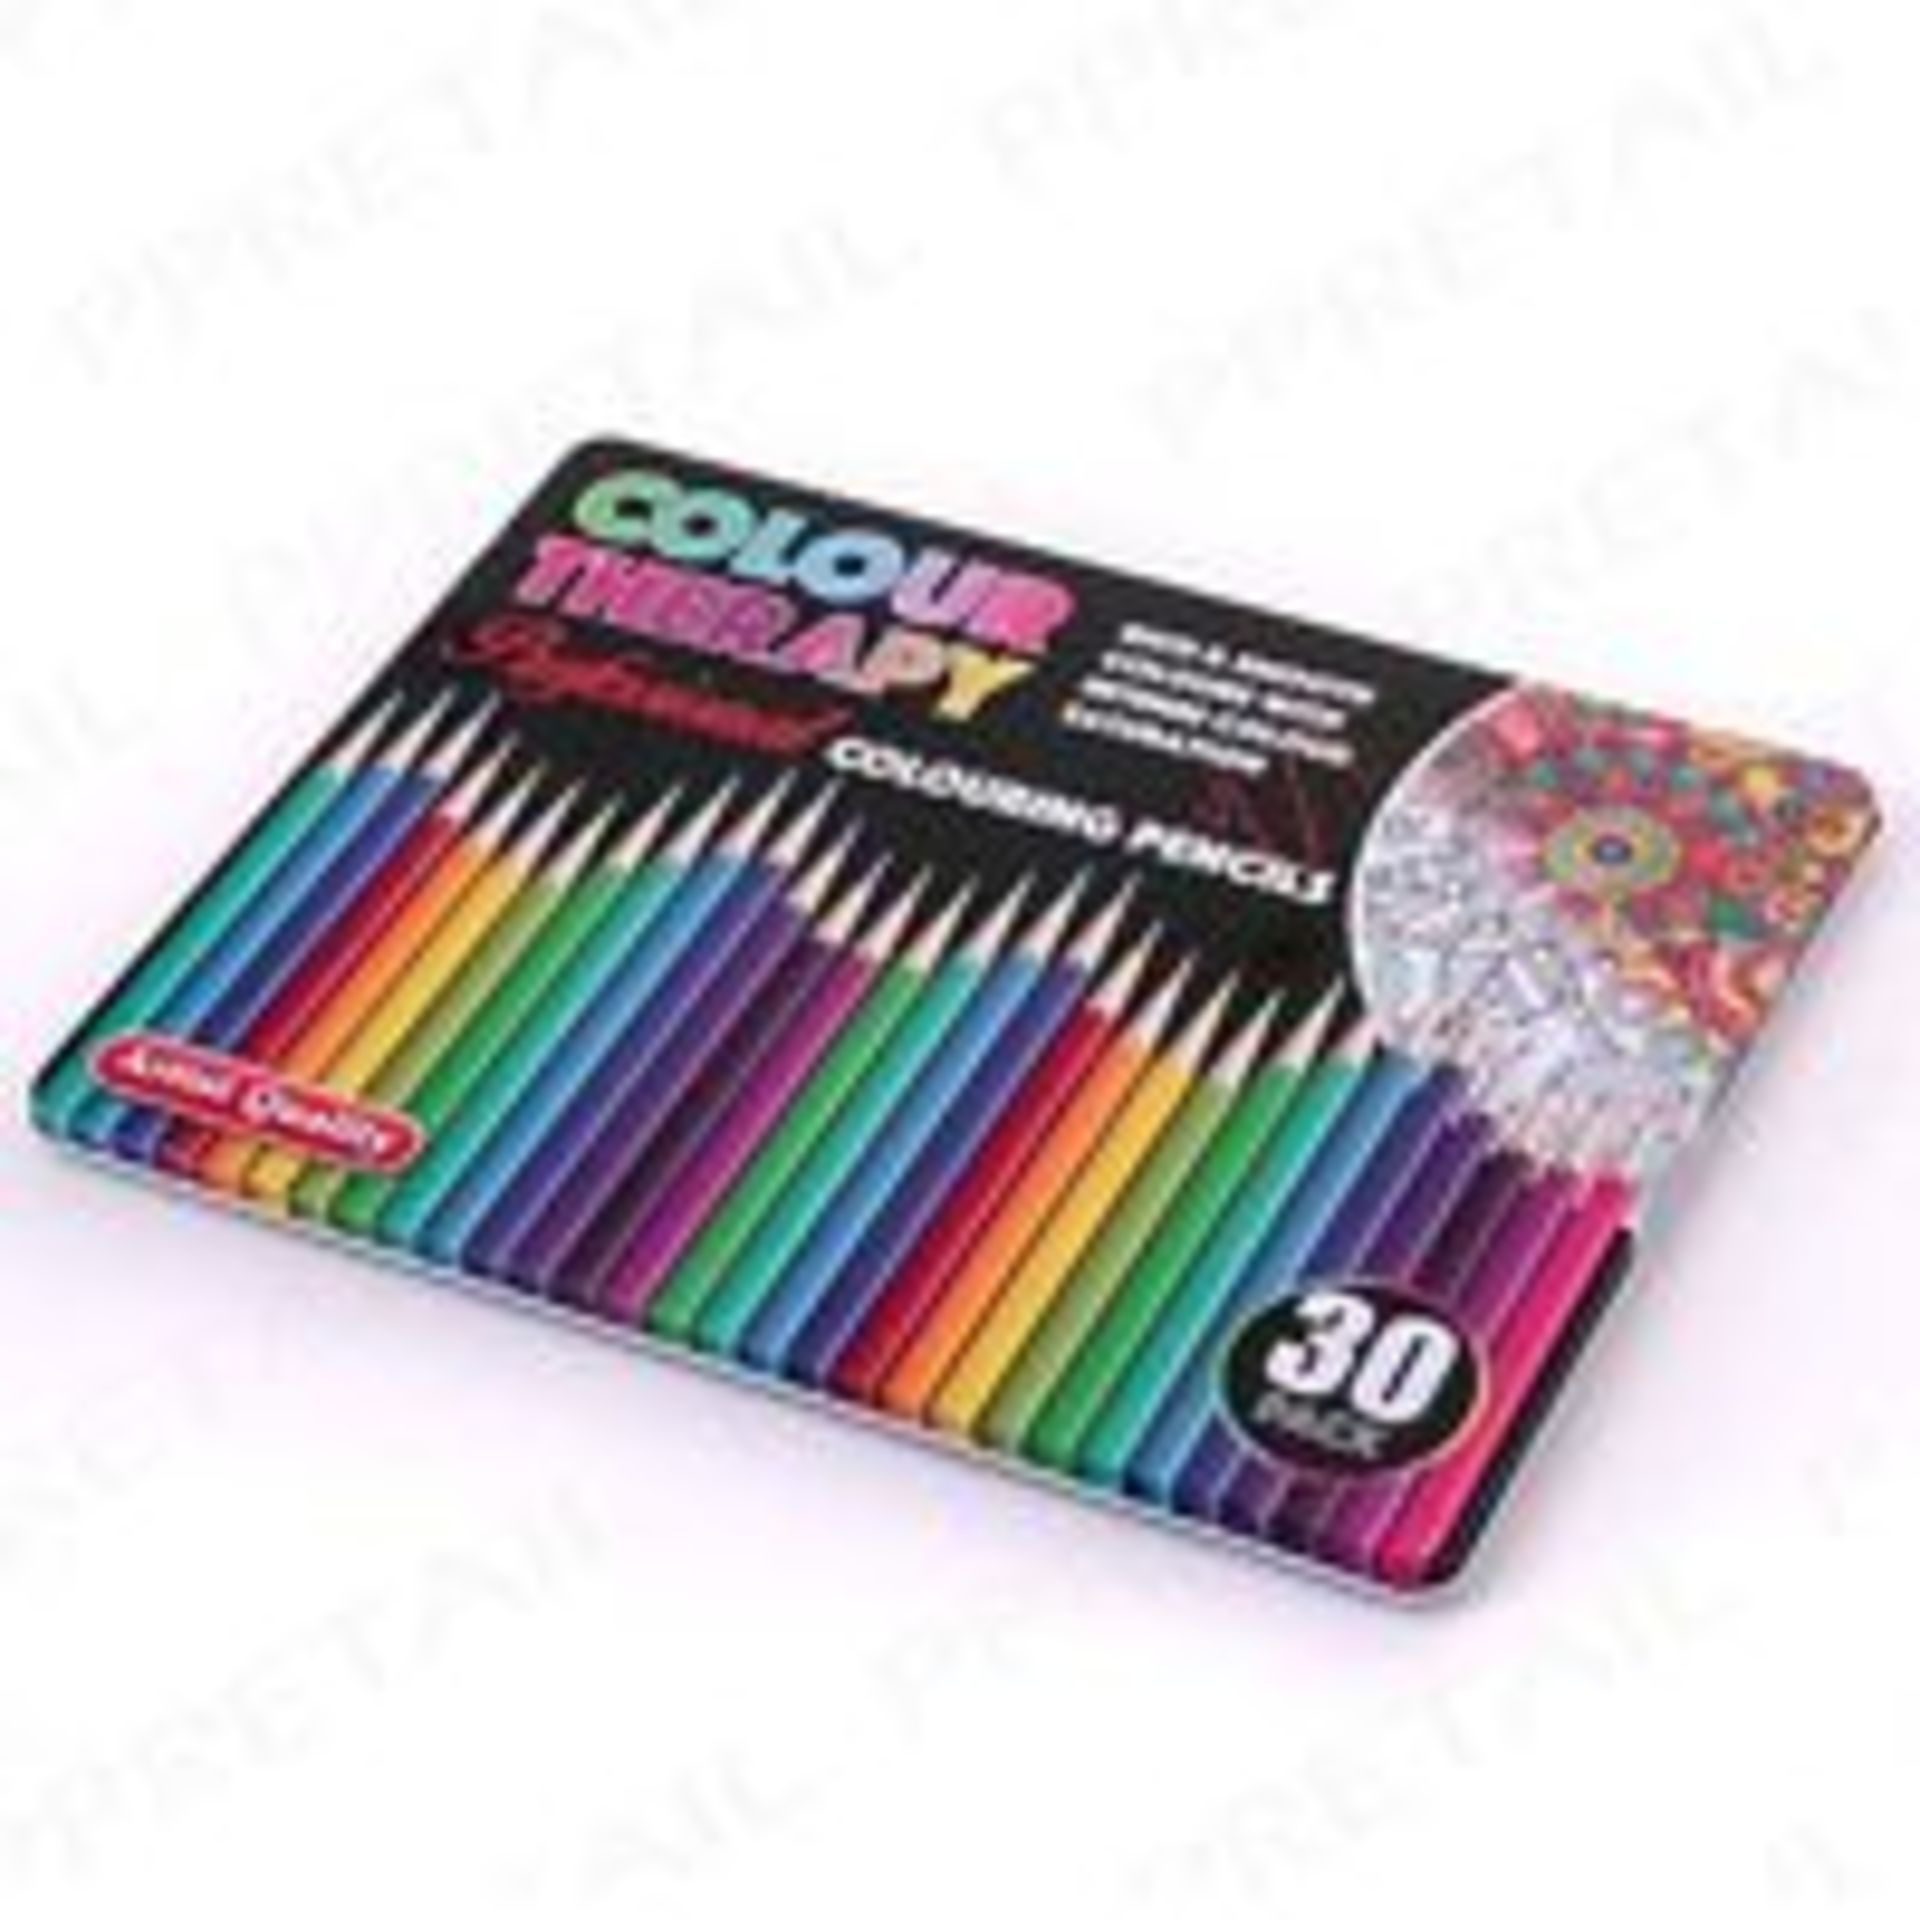 V Brand New 30 Pack Professional Colouring Pencils - Artist Quality X 2 YOUR BID PRICE TO BE